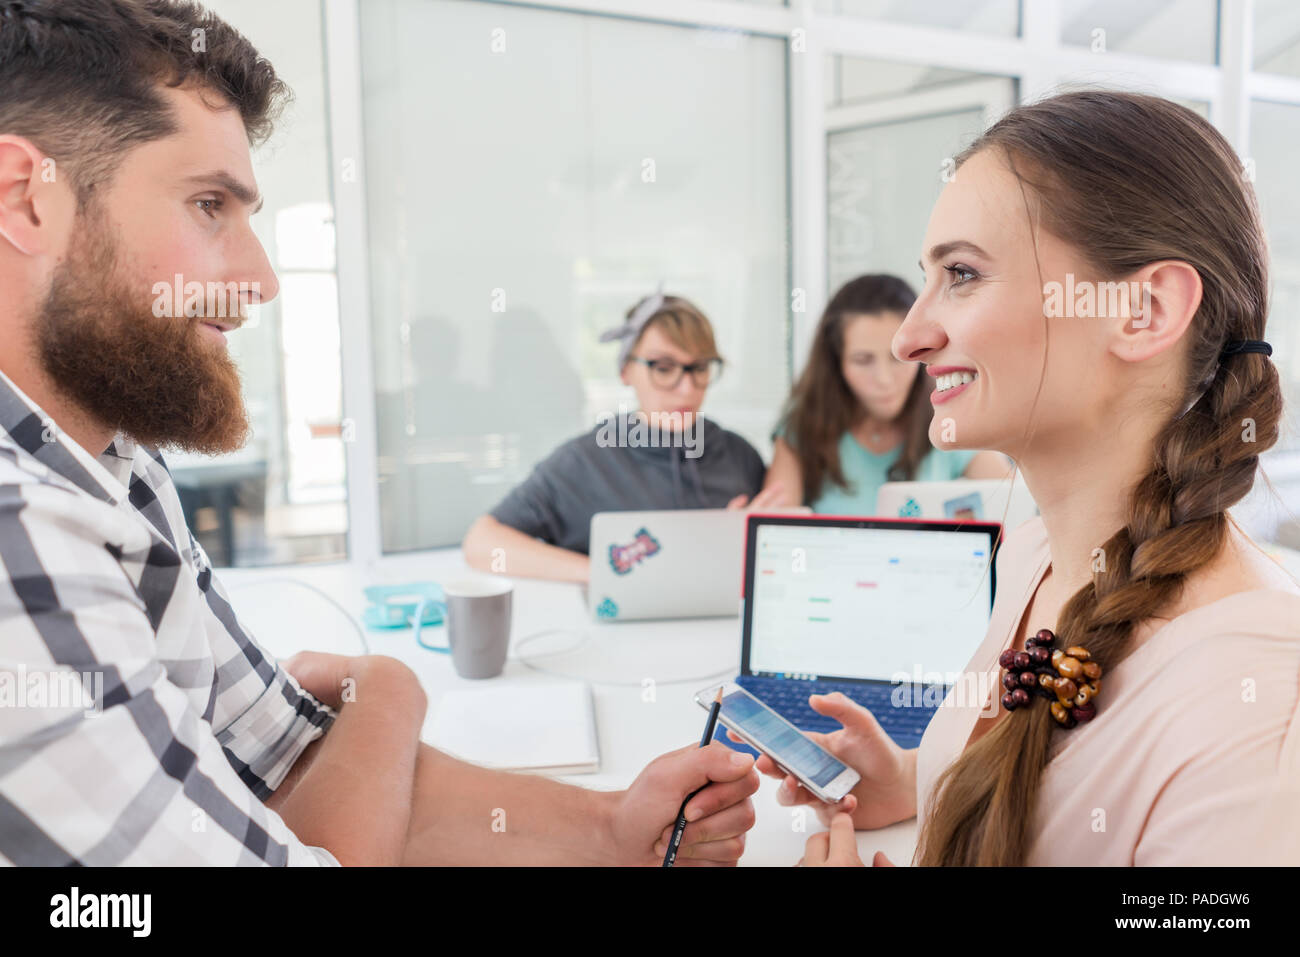 Creative female freelancer smiling to co-worker Stock Photo